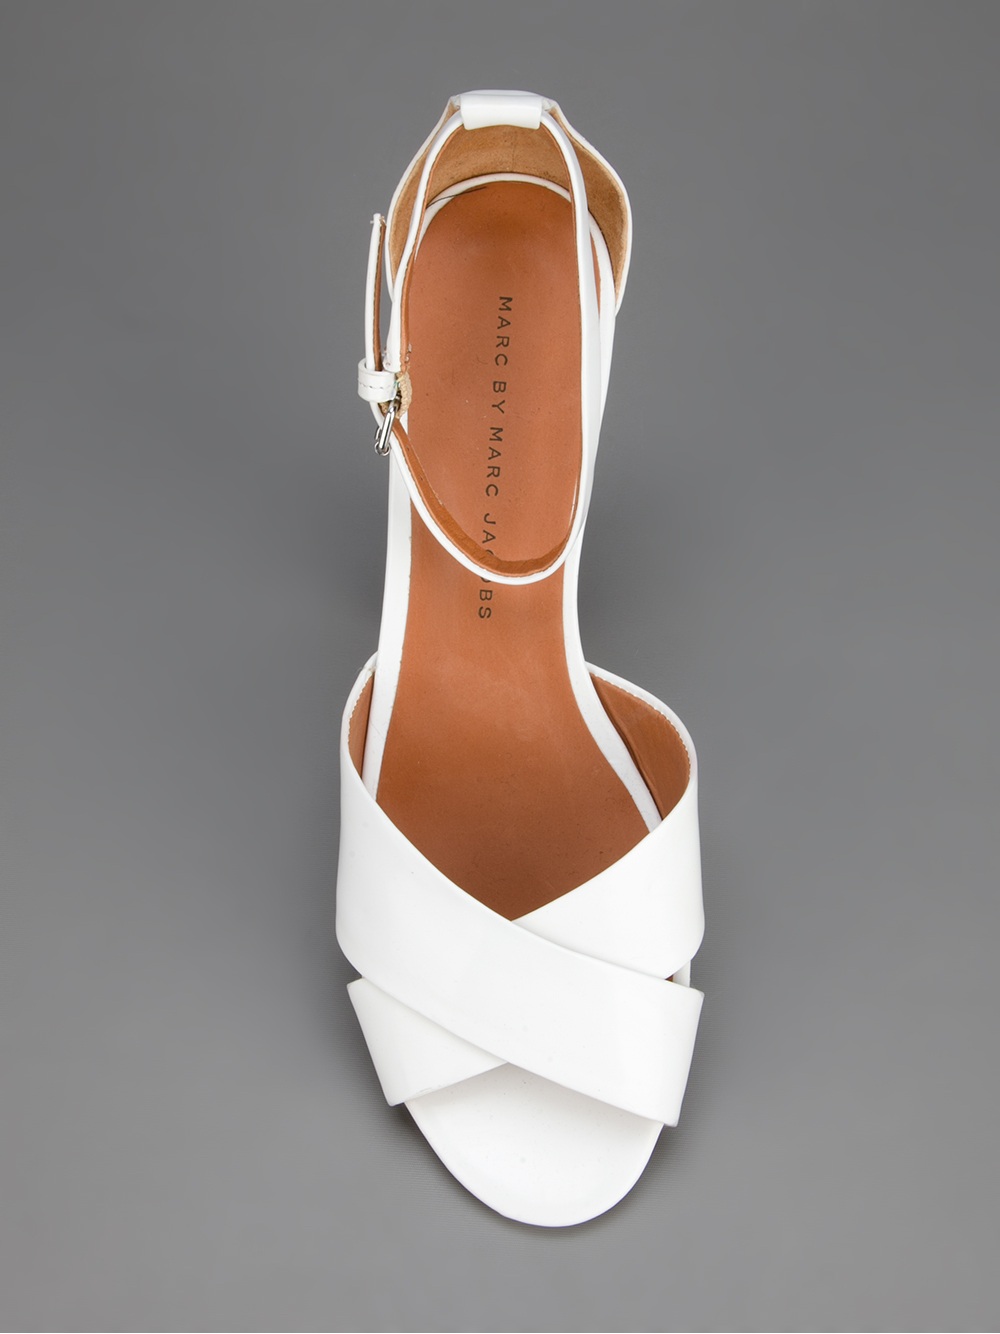 Marc By Marc Jacobs Low  Wedge  Sandal  in White  Lyst